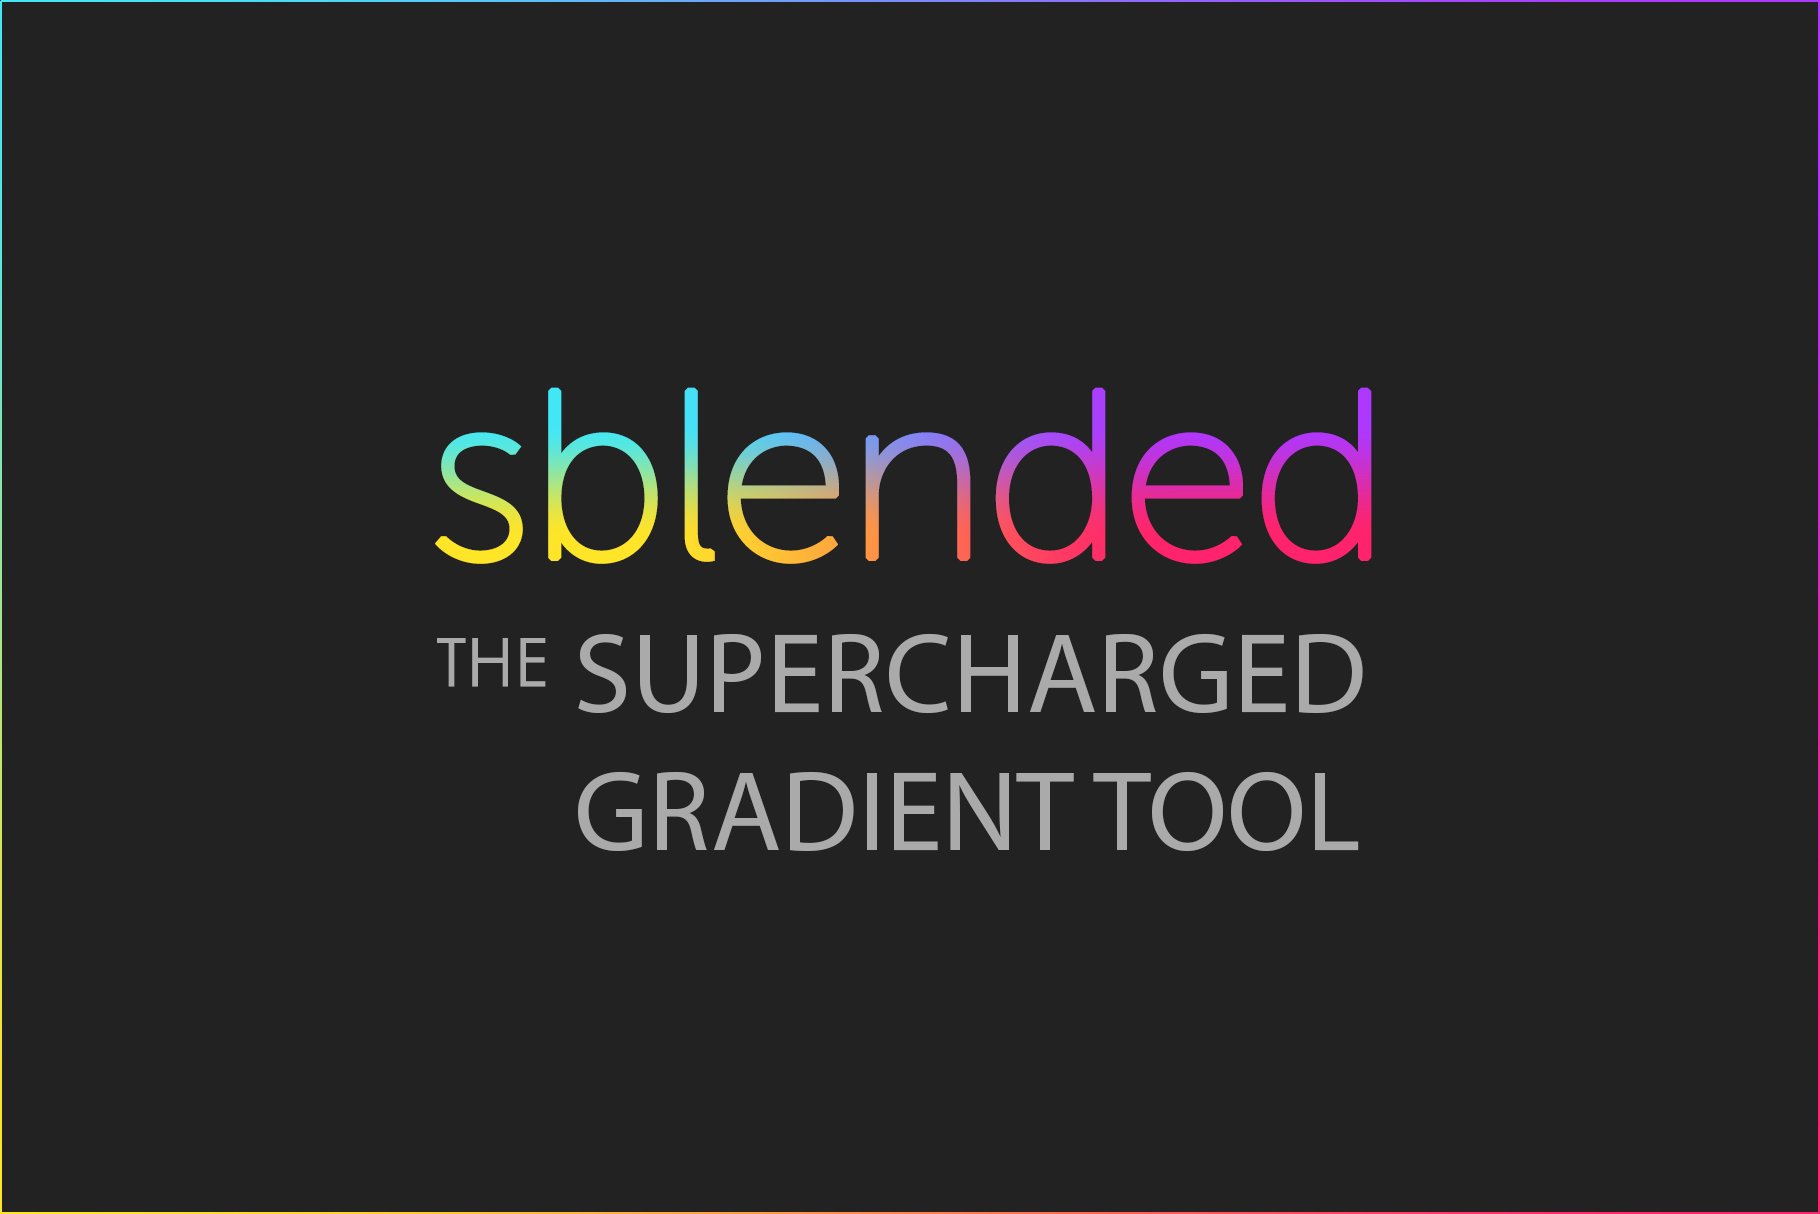 Sblended: Supercharged Gradient Toolcover image.